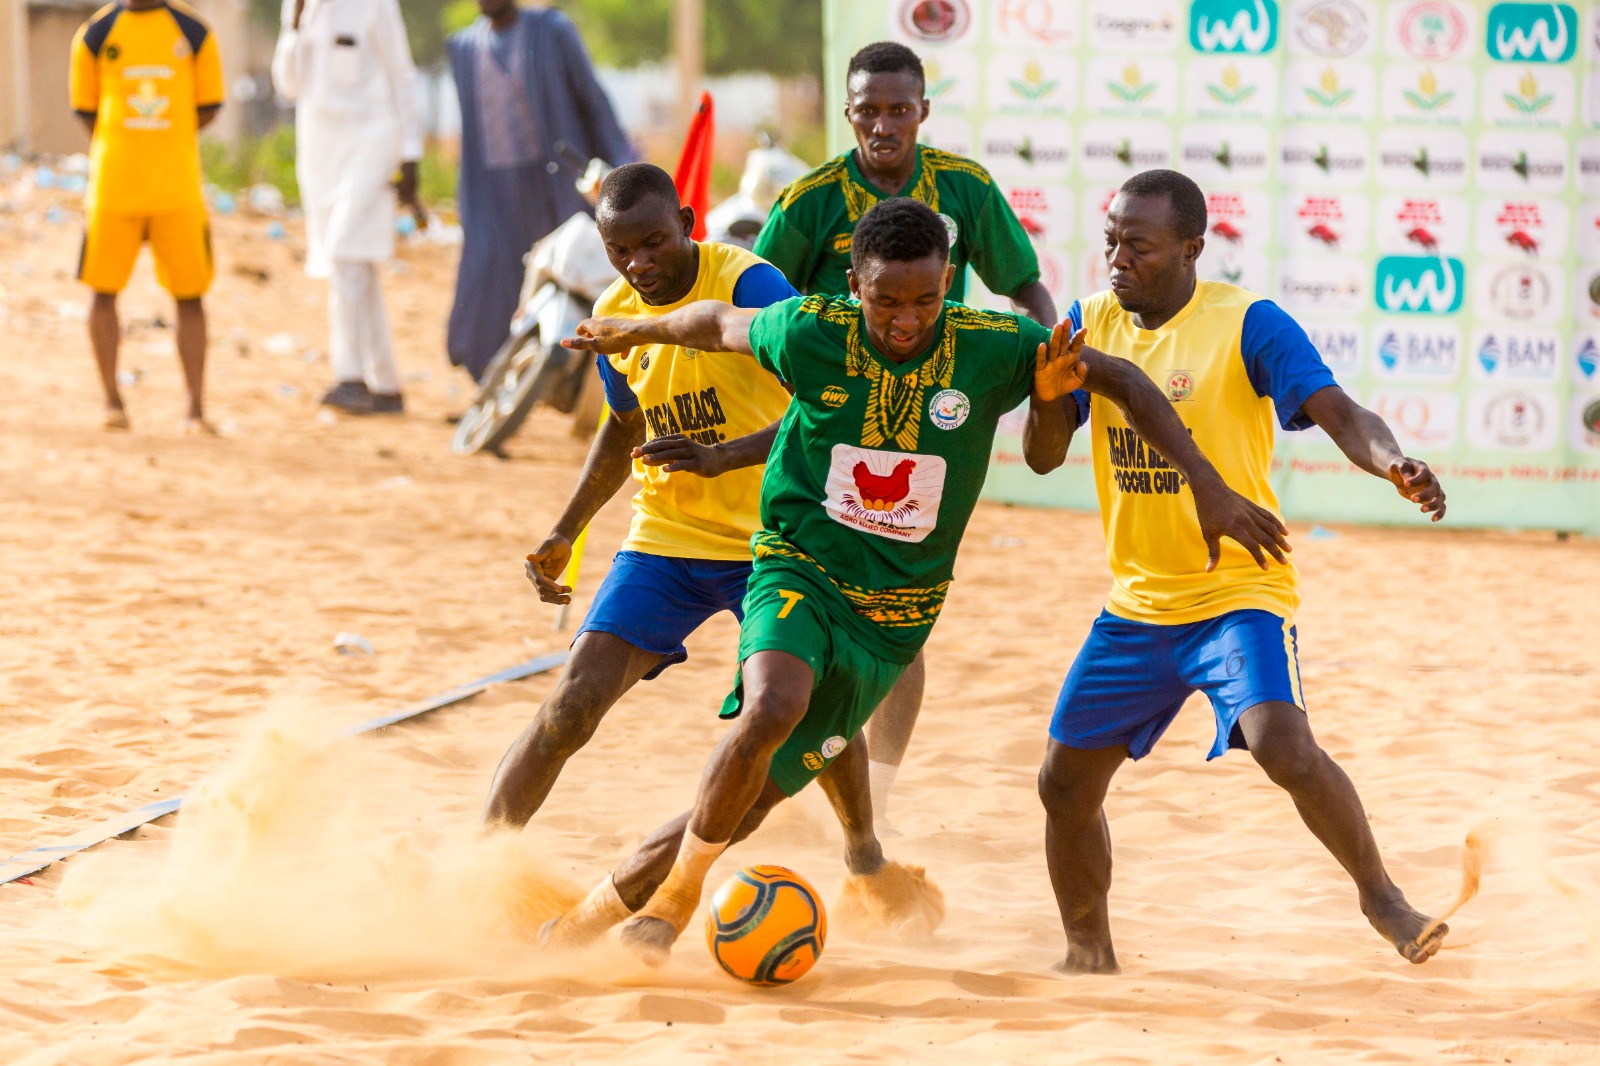 NBSL: Kebbi United earn first point with win over defending champions, Kebbi Fishers